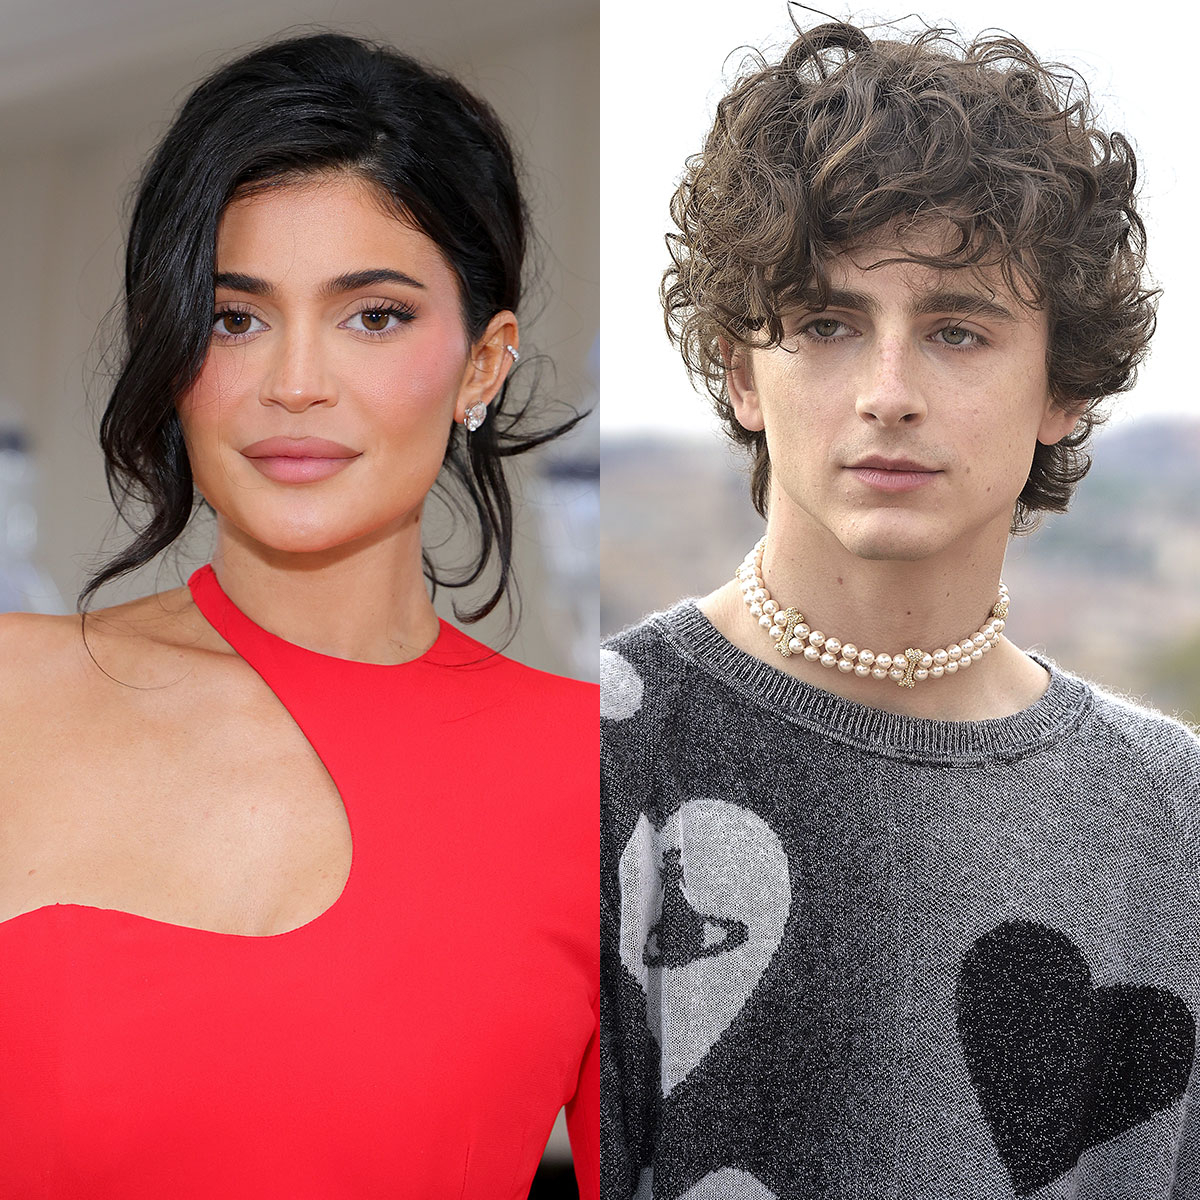 Kylie Jenner & Timothée Chalamet Make First Joint Appearance in Months